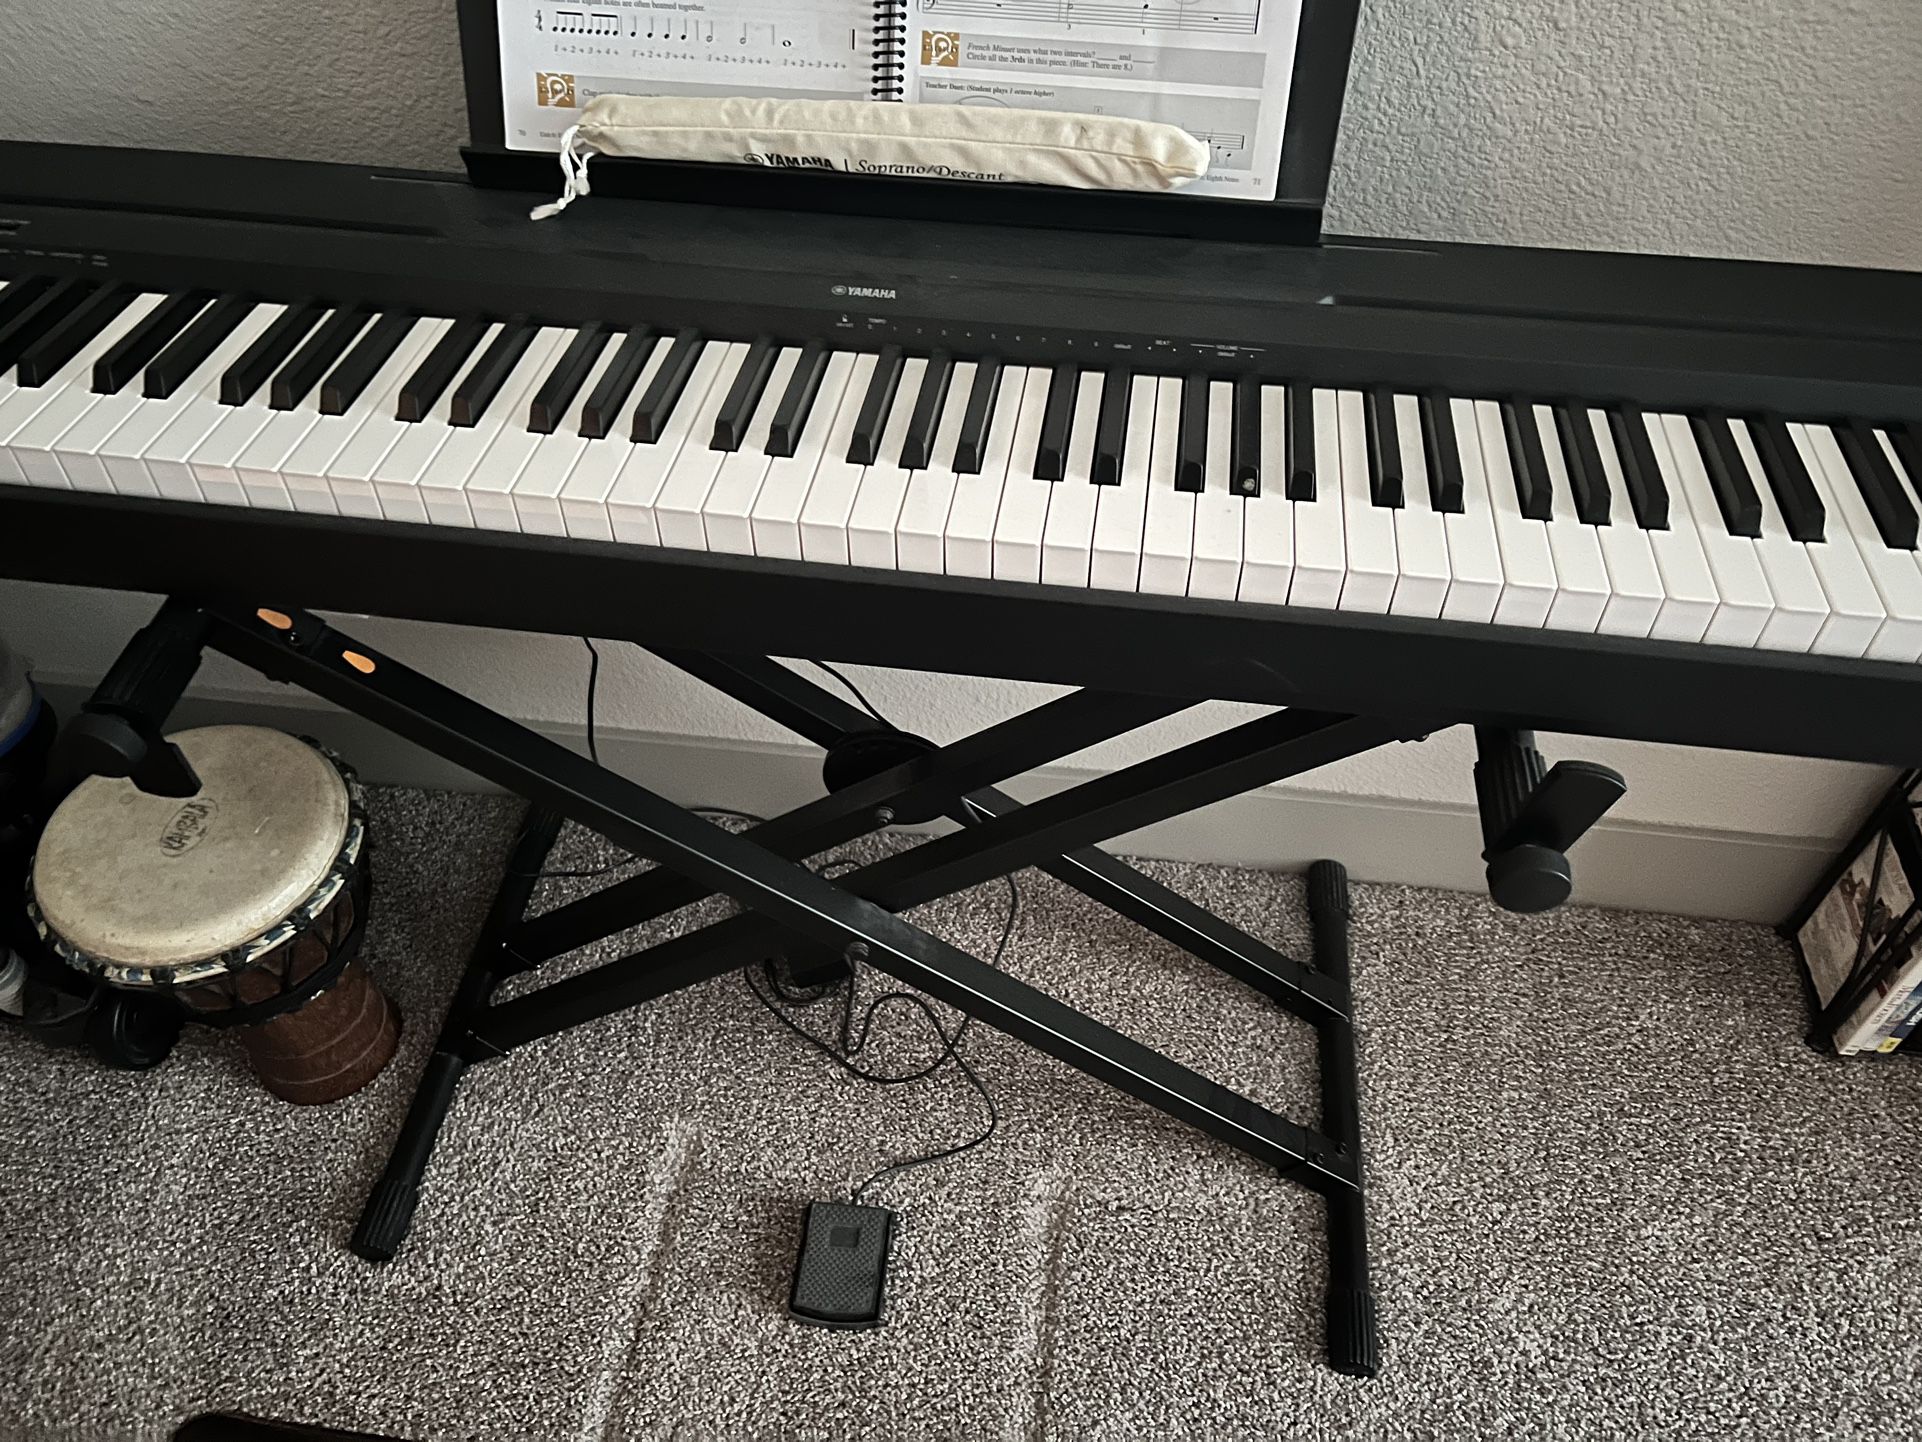 Yamaha 88 Key Keyboard With Stand, Stool, Sustain Pedal. Brand New, Never Used.